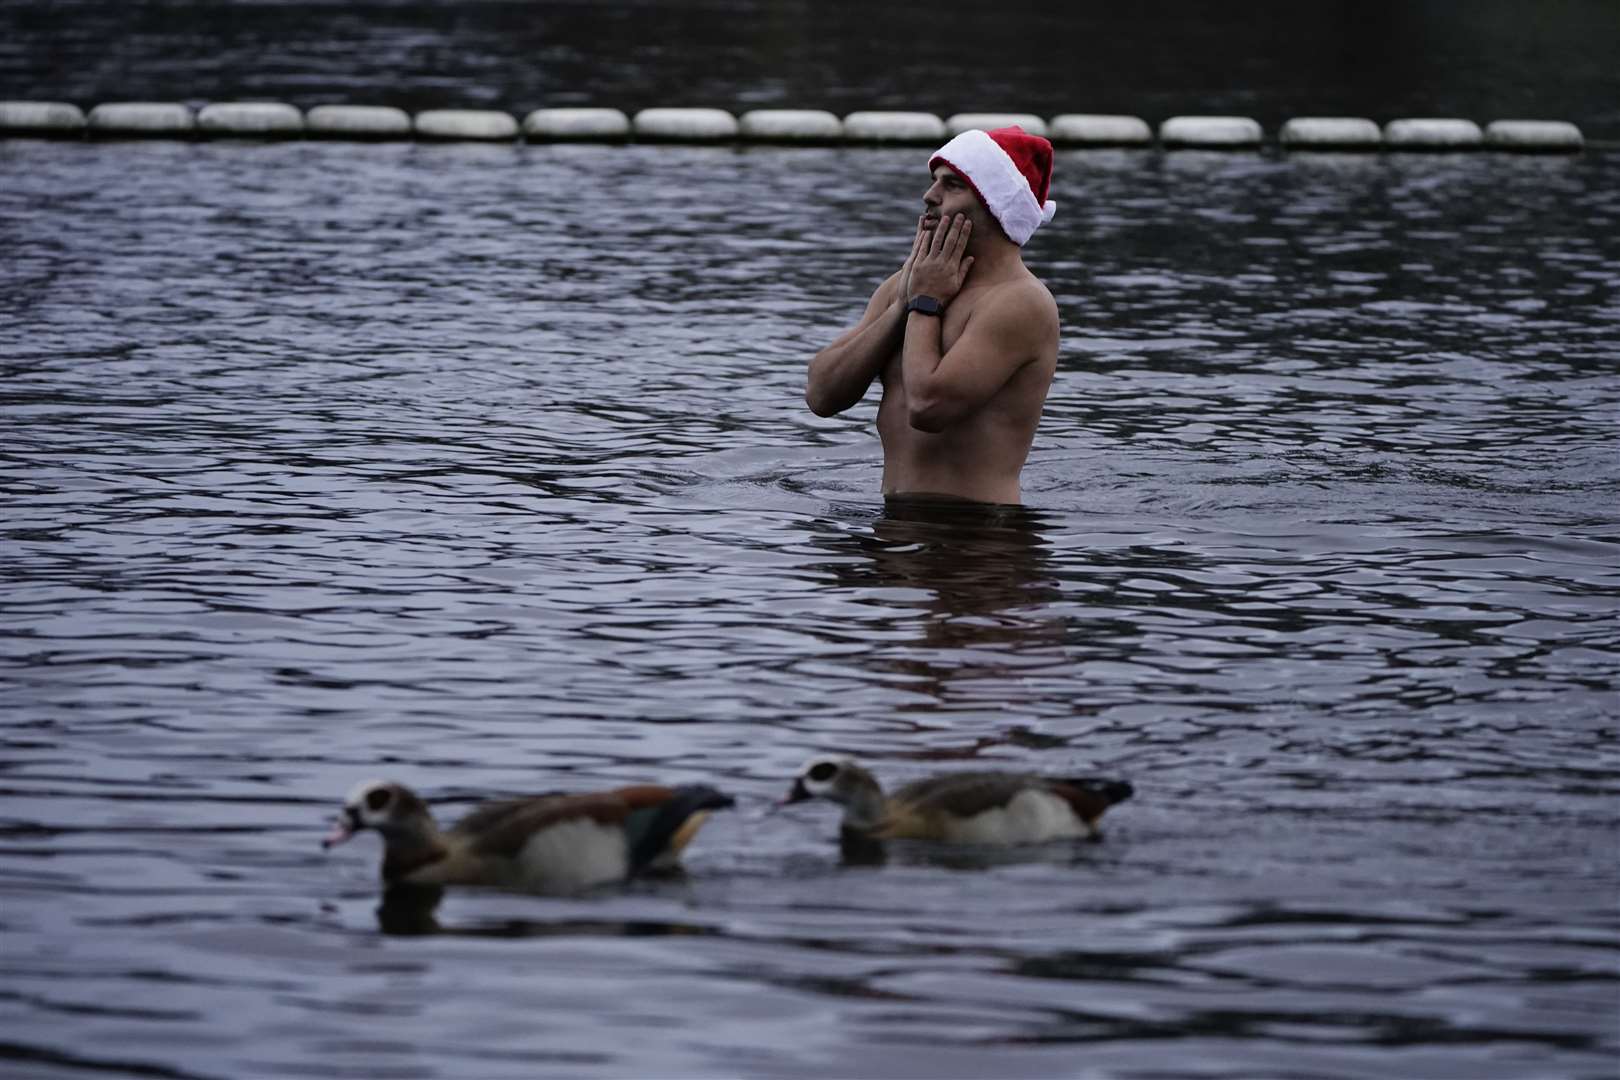 Ducks watched as one man paused during his swim in the Serpentine in Hyde Park, ahead of the annual Peter Pan Cup race that is held every December 25 (Aaron Chown/PA)